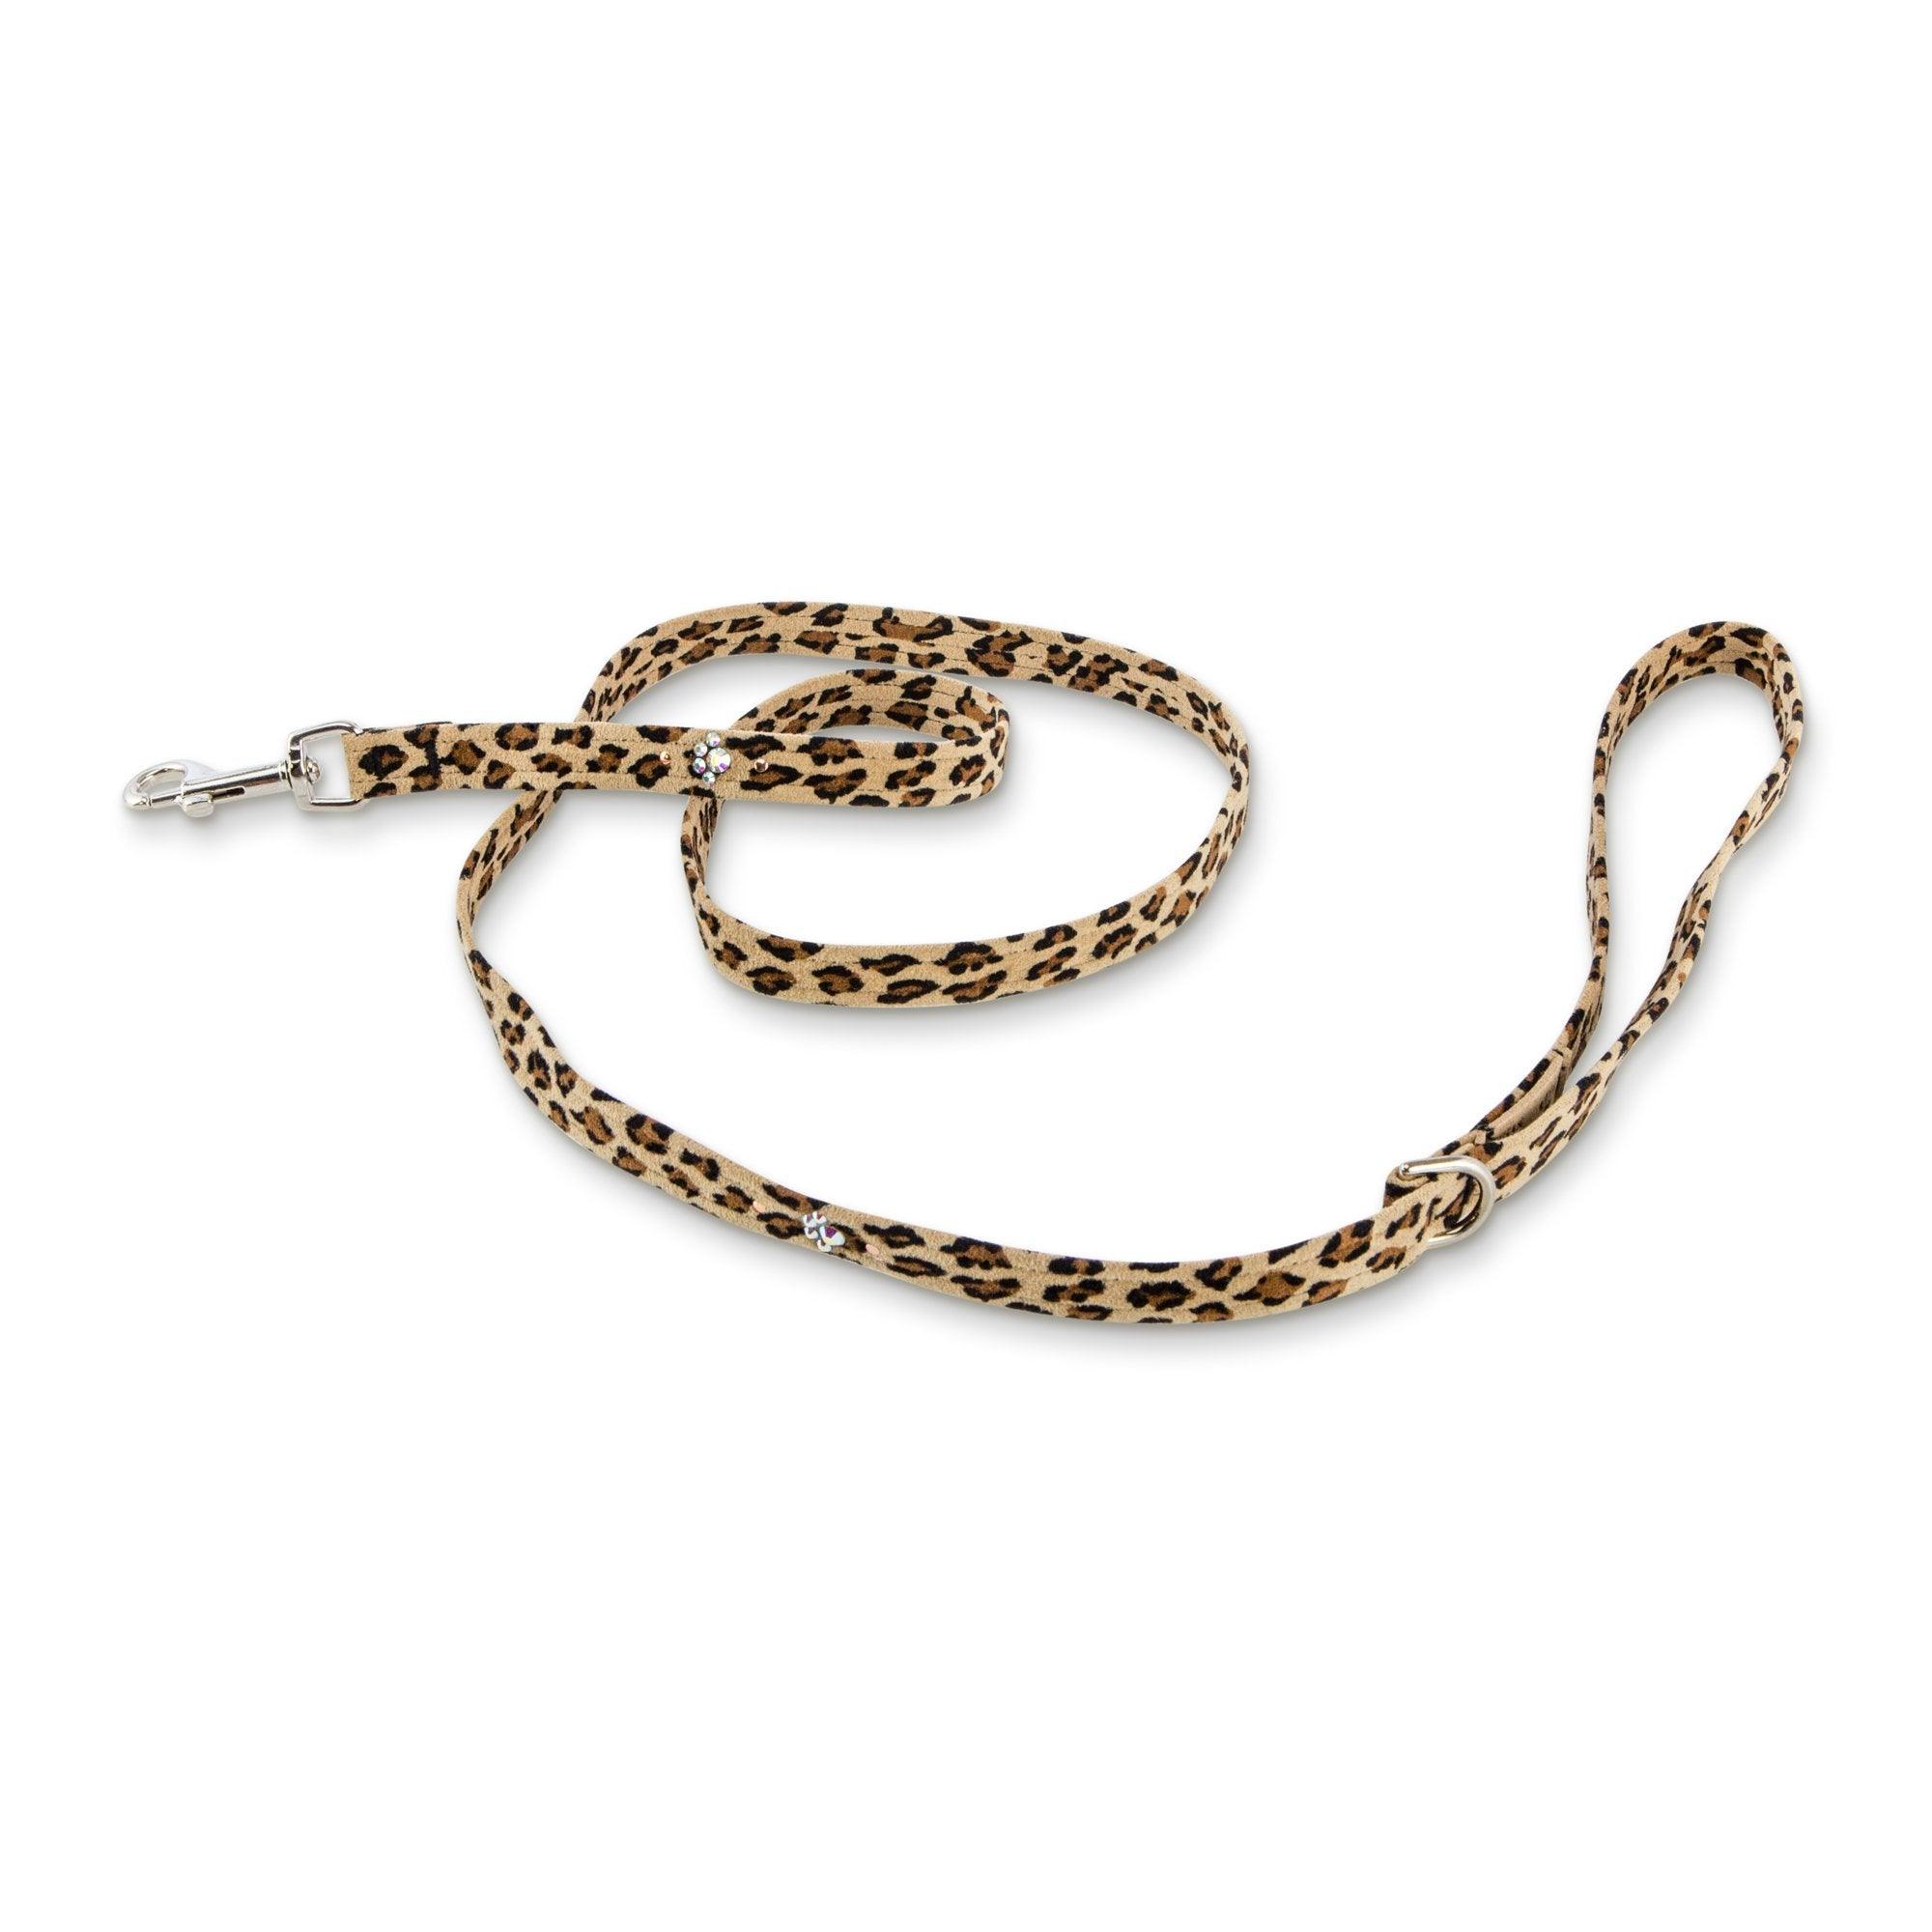 Cheetah Couture Crystal Paws Leash - Rocky & Maggie's Pet Boutique and Salon